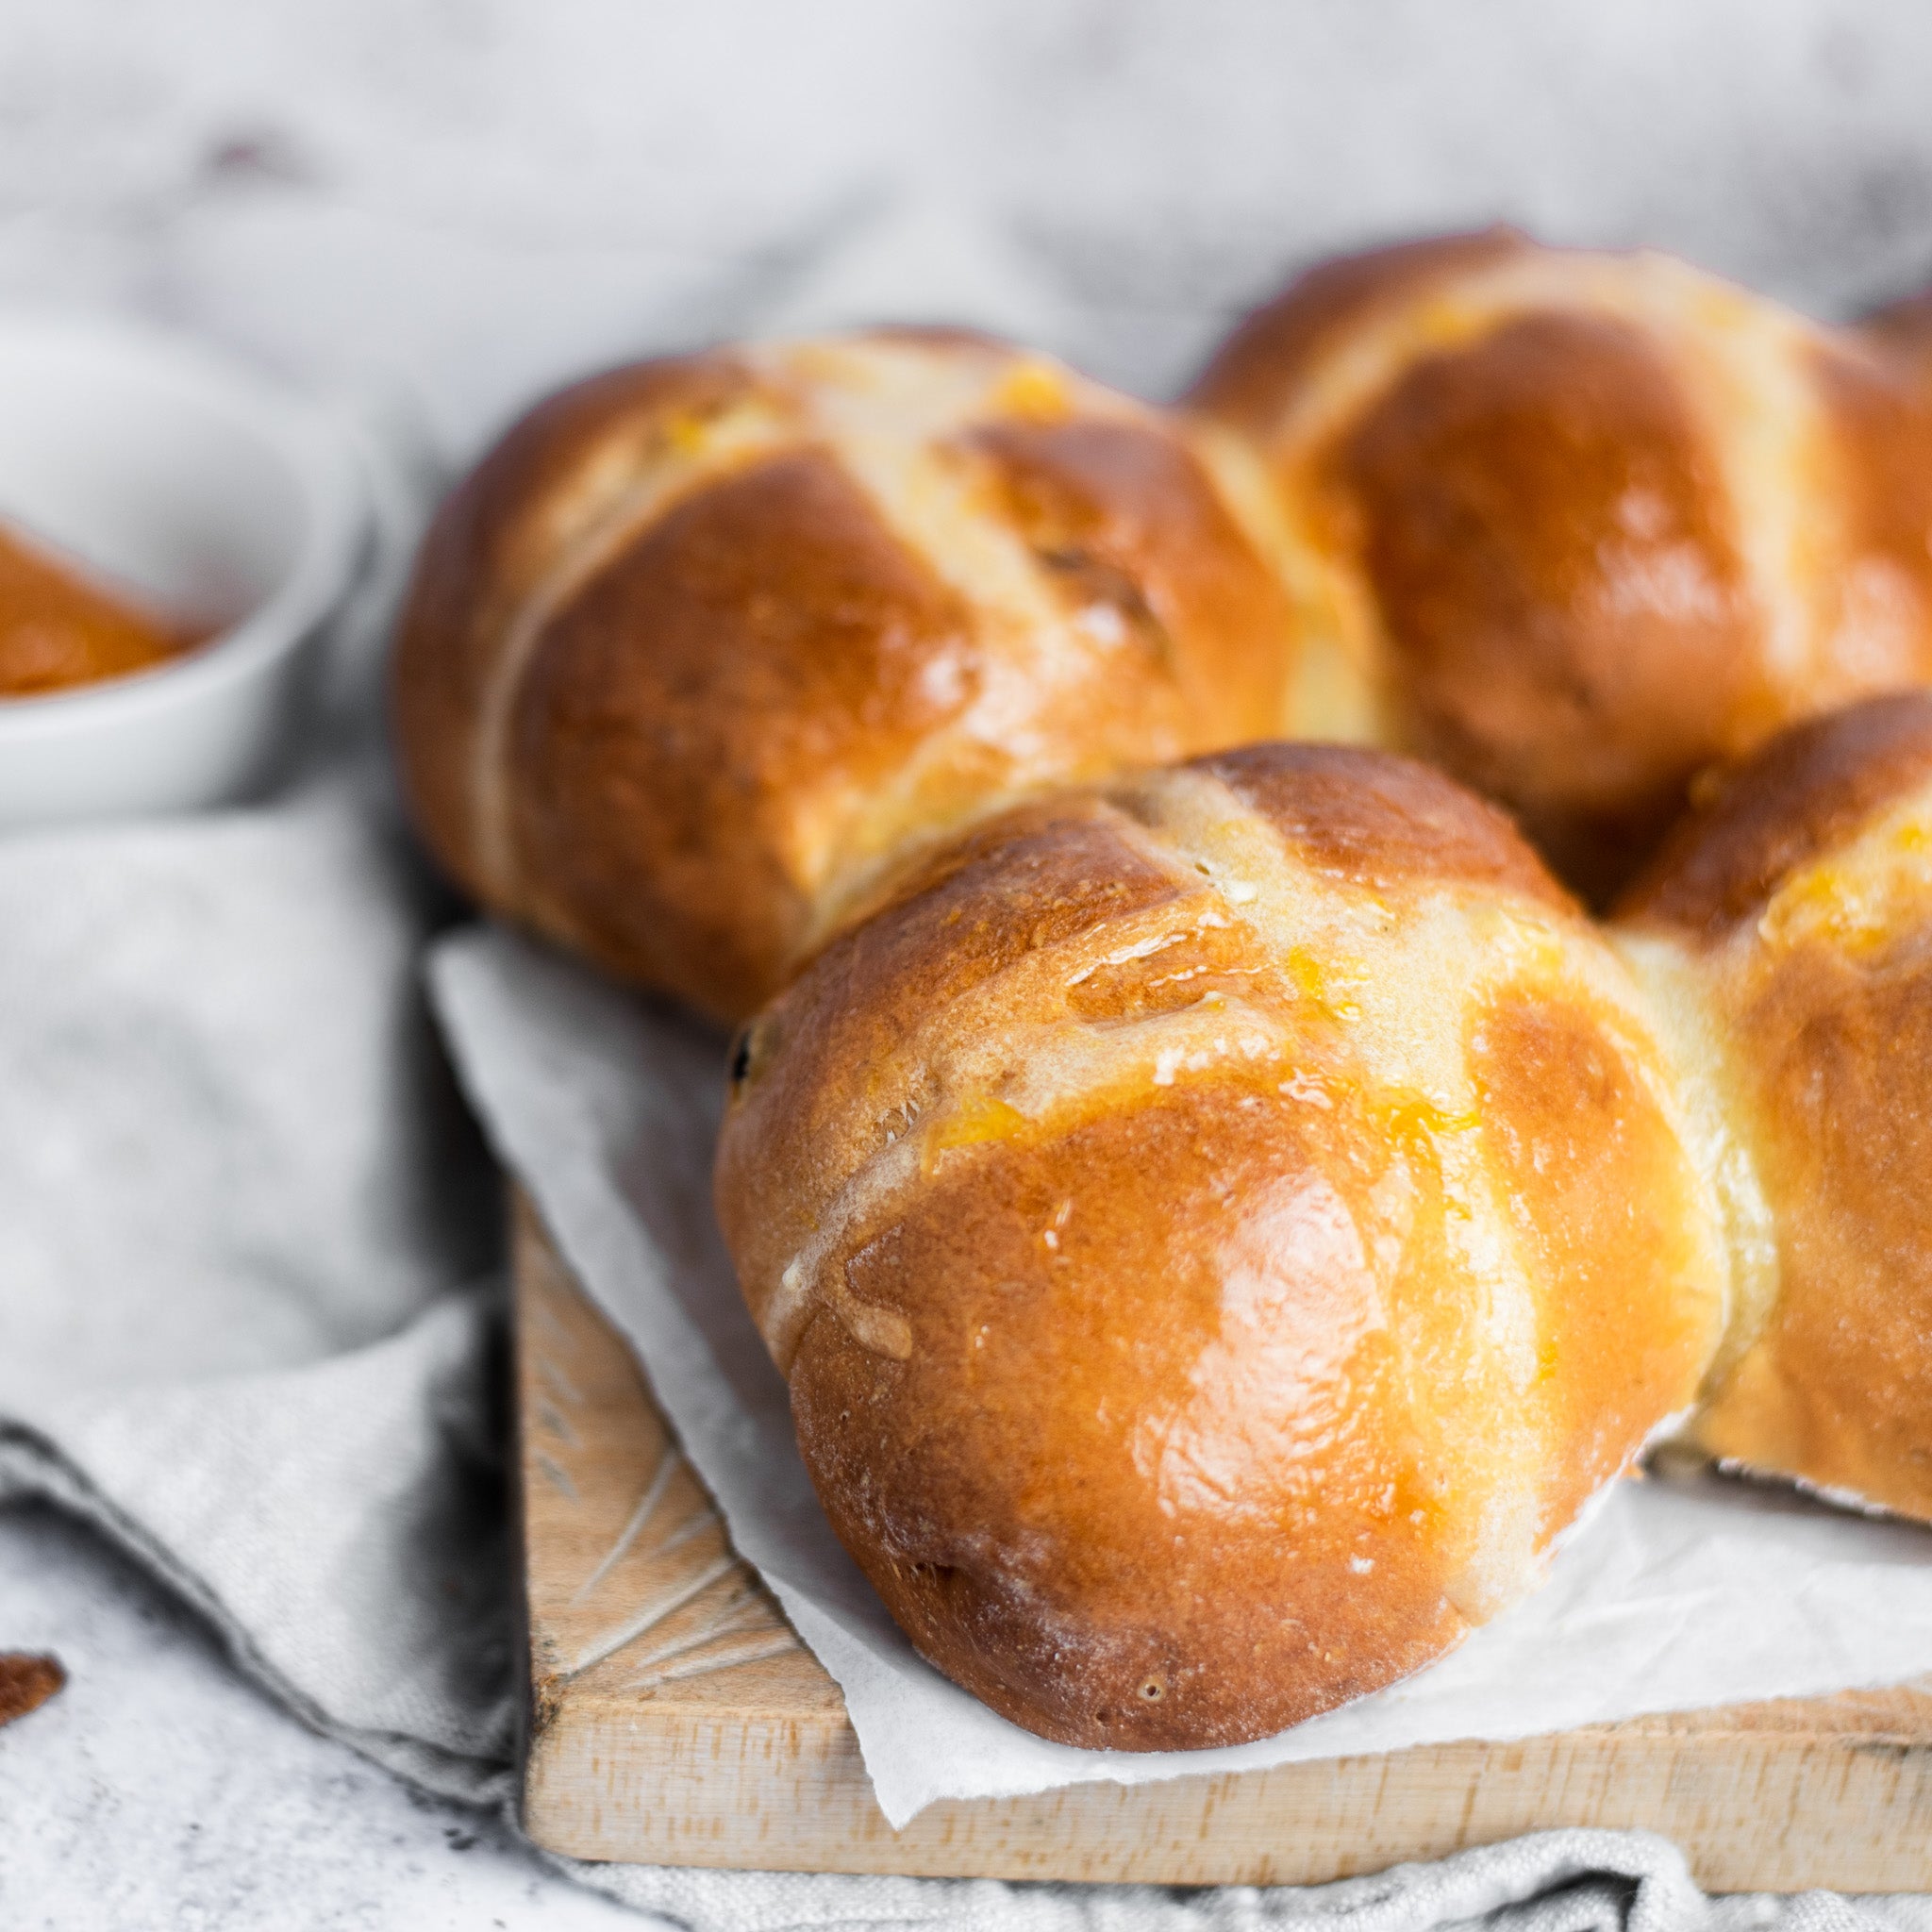 Close-up of a hot cross bun with a sweet apricot glaze